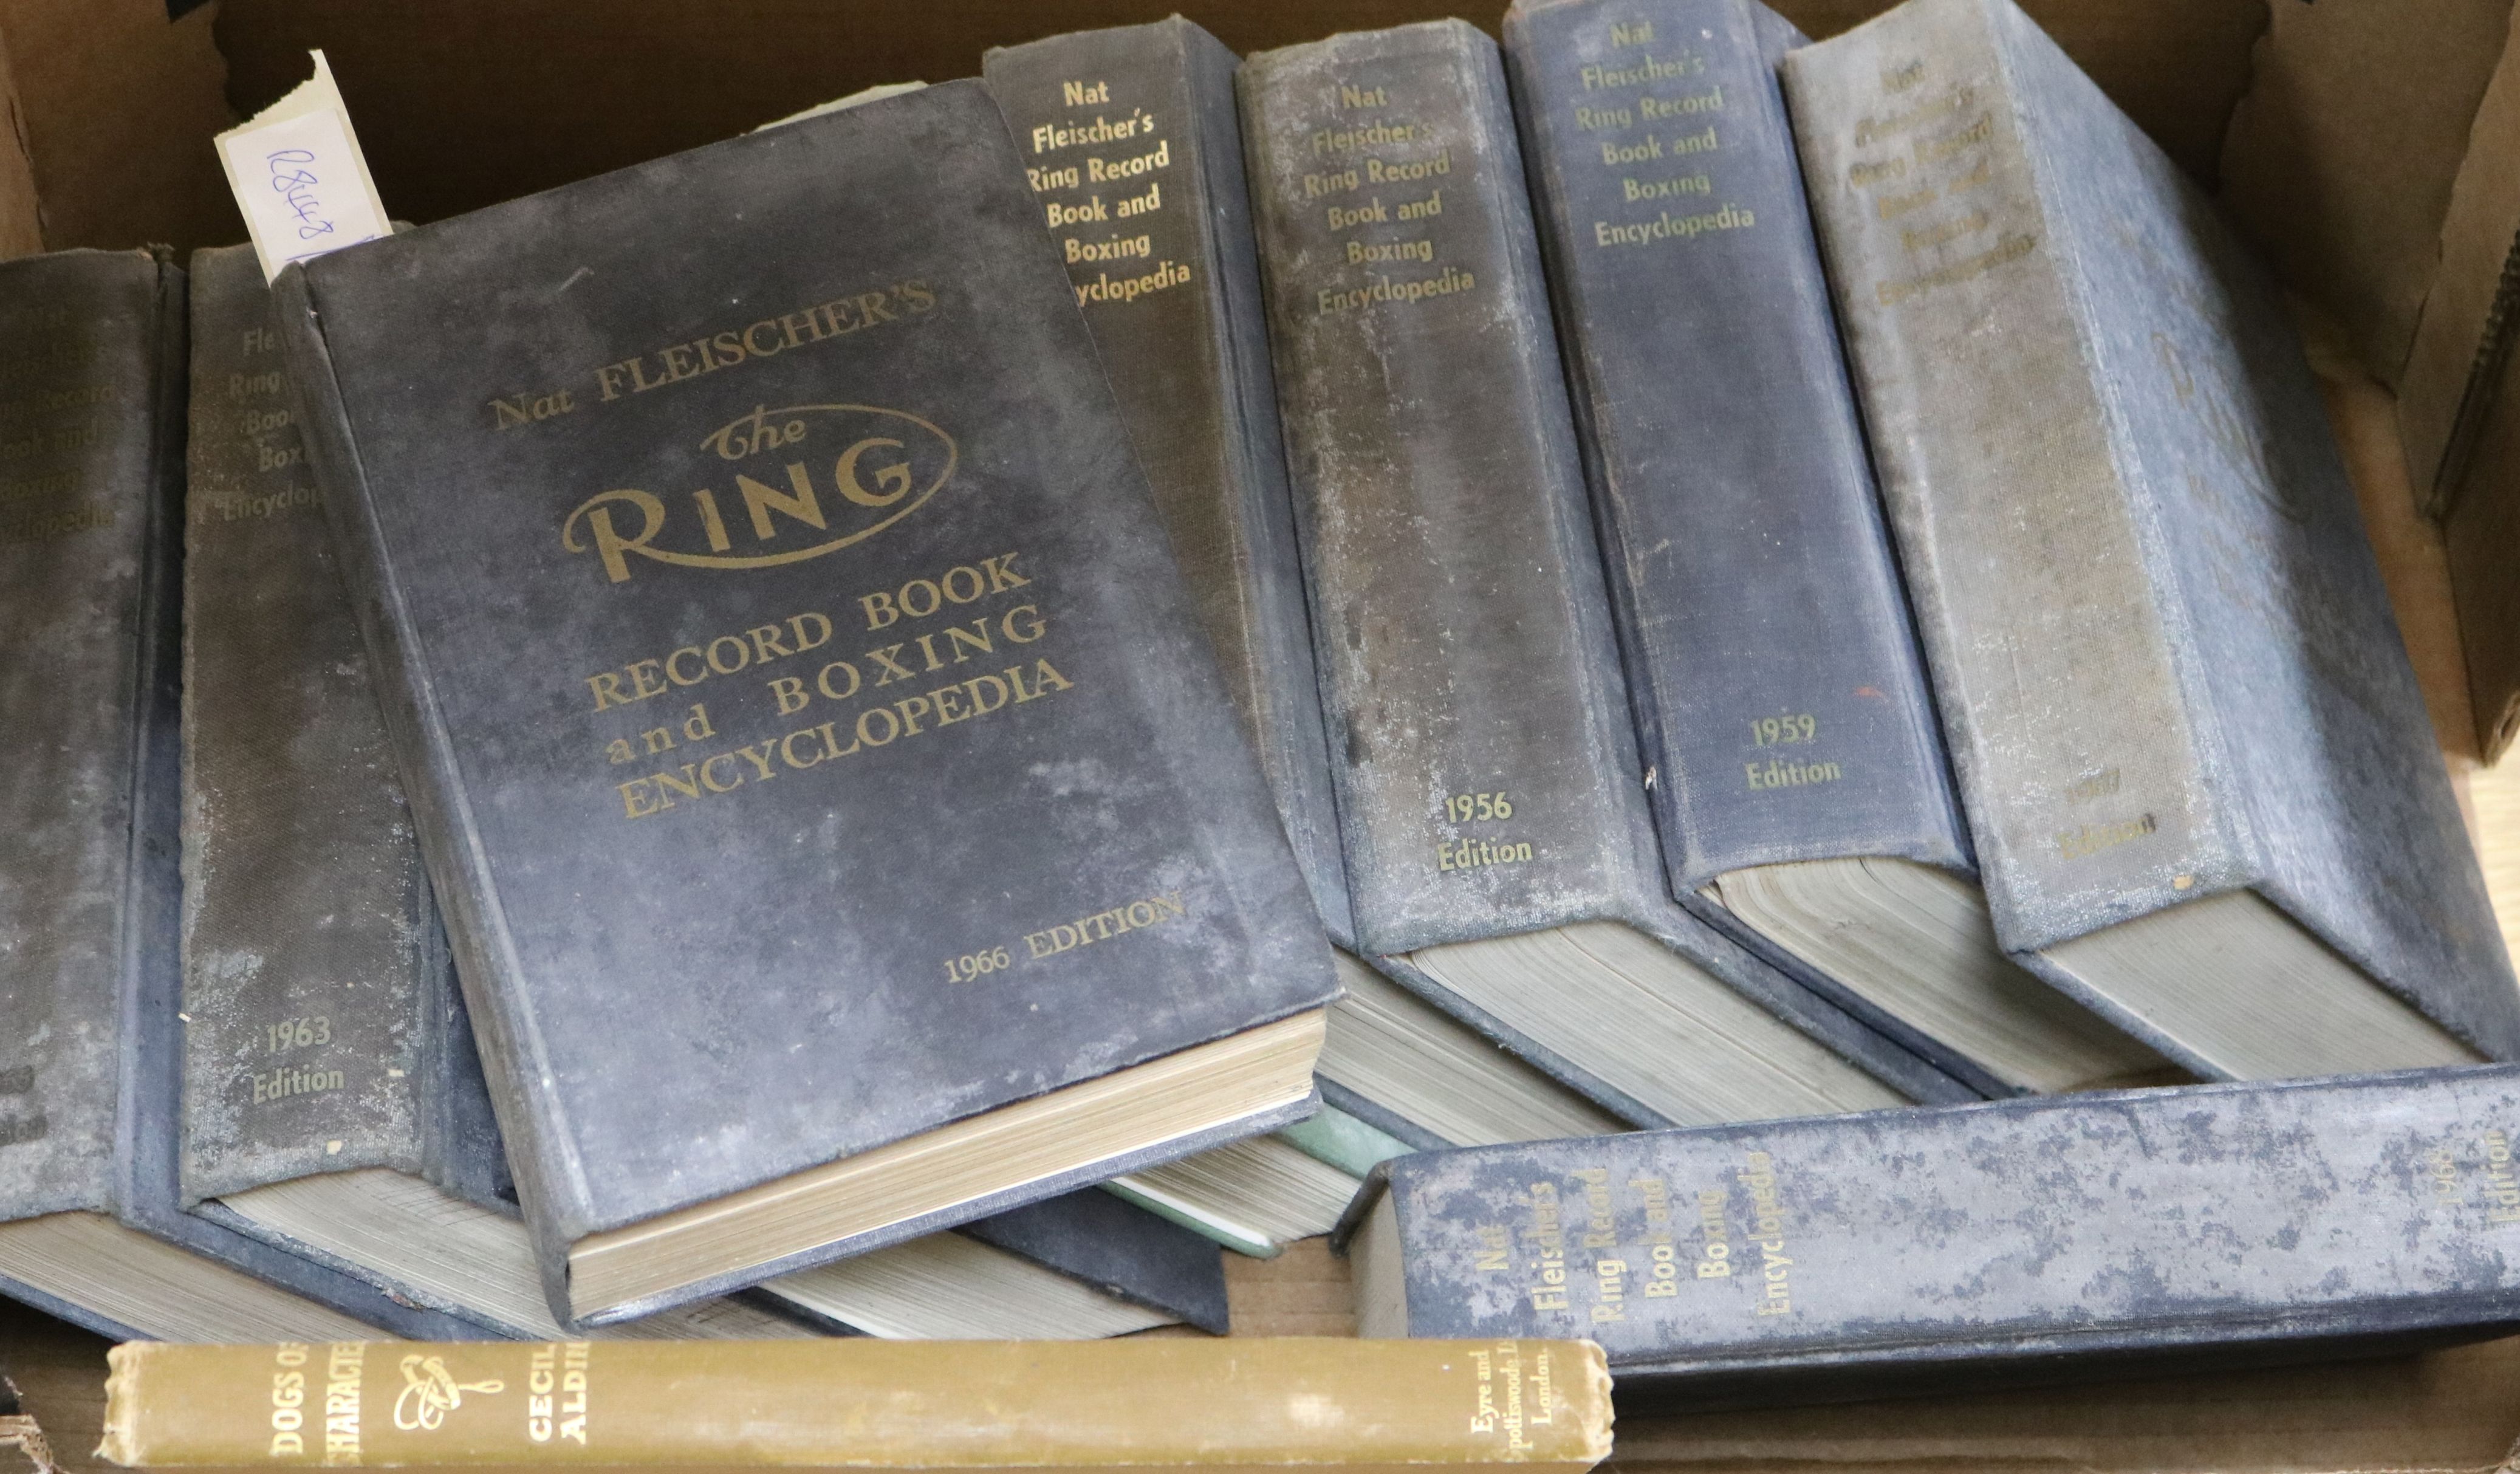 Nat Fleischer's Ring Record book and boxing encyclopedia, 10 editions, c.1950/1960 and an edition of